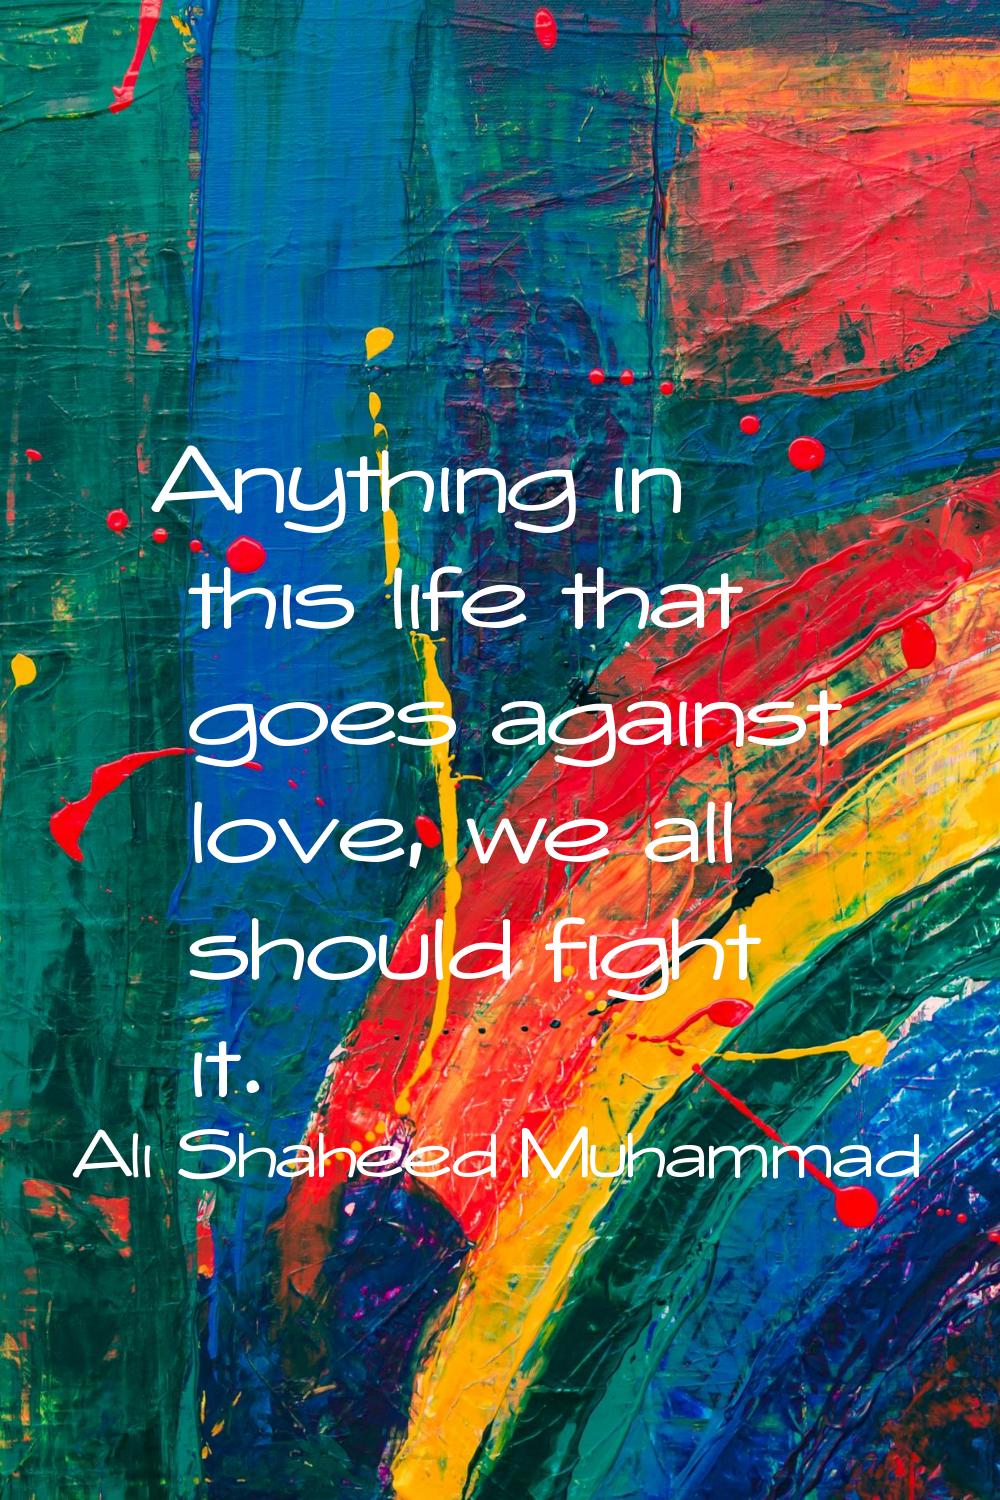 Anything in this life that goes against love, we all should fight it.